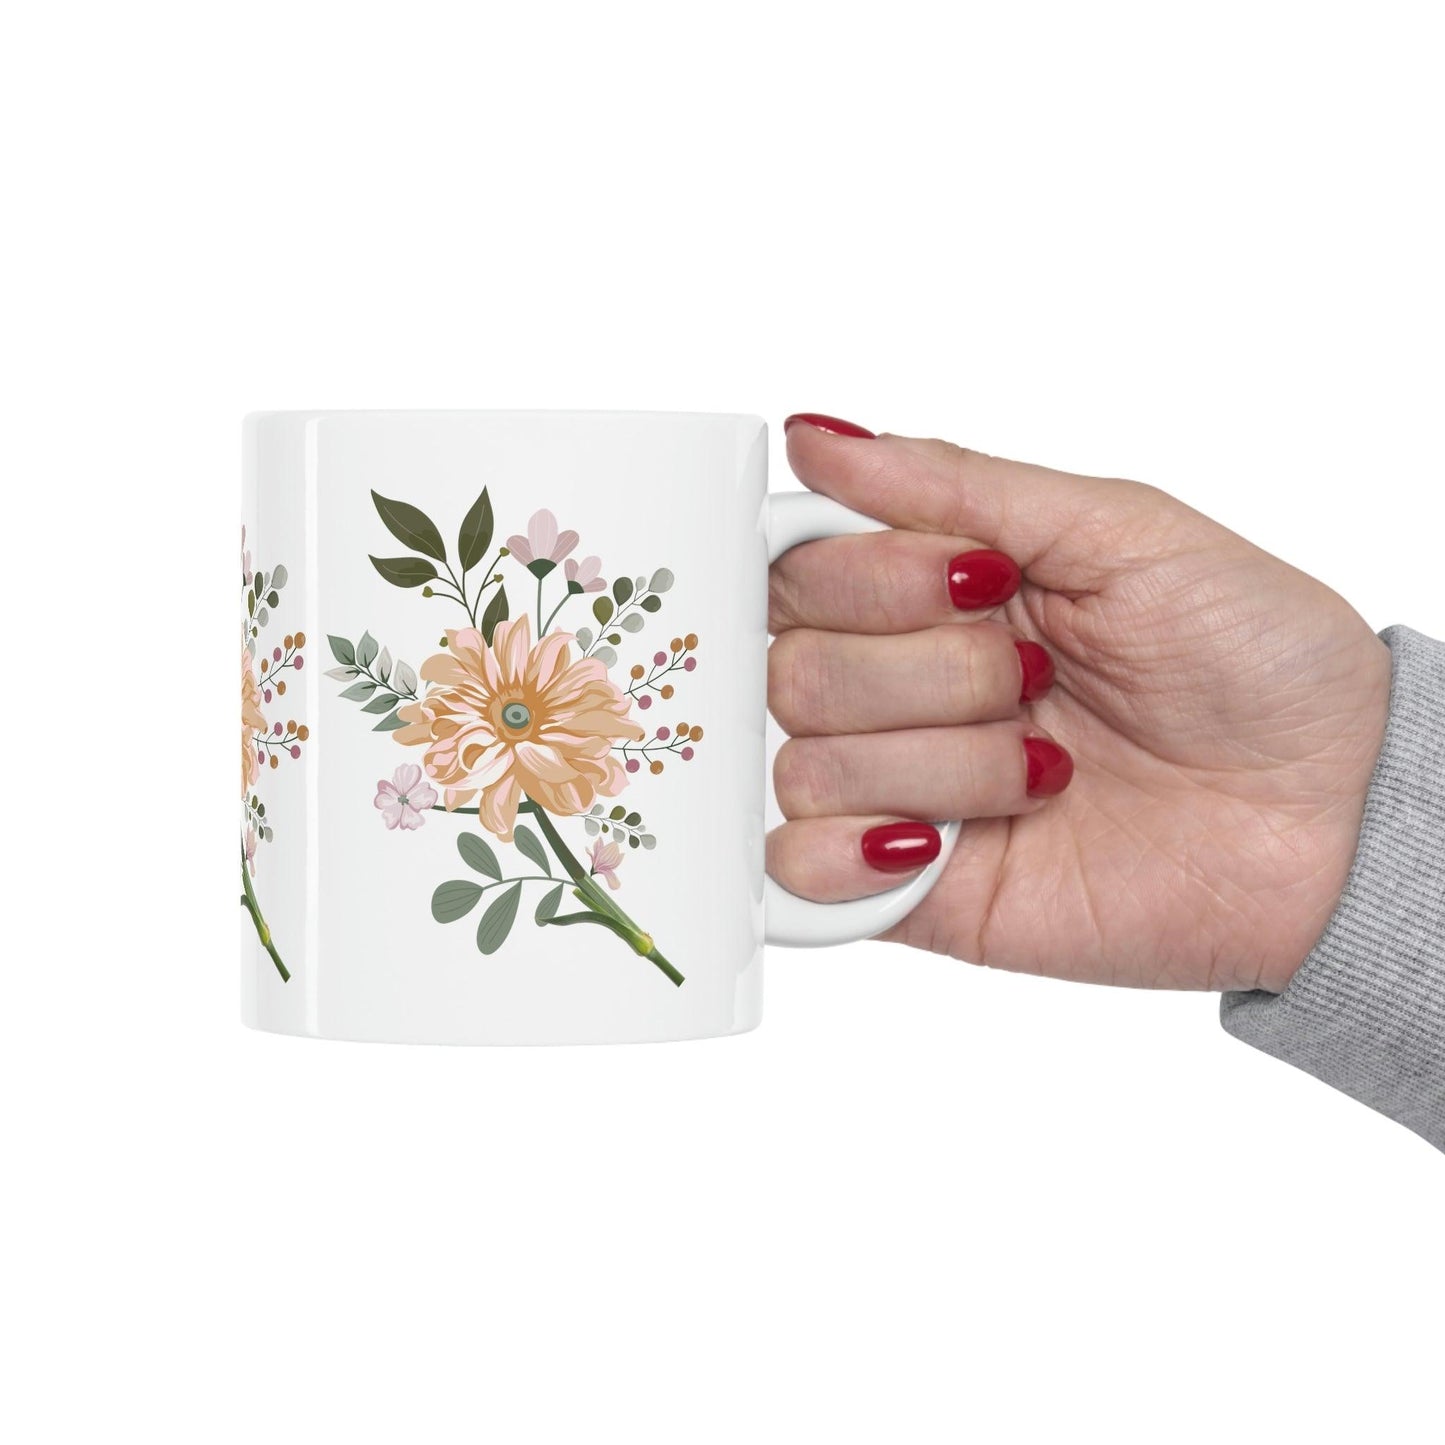 Floral Mug, gift for mom on mothers day, Birthday gift for mom, gift for plant lovers, coffee mug for her, hot cocoa mug, gift for coffee lover